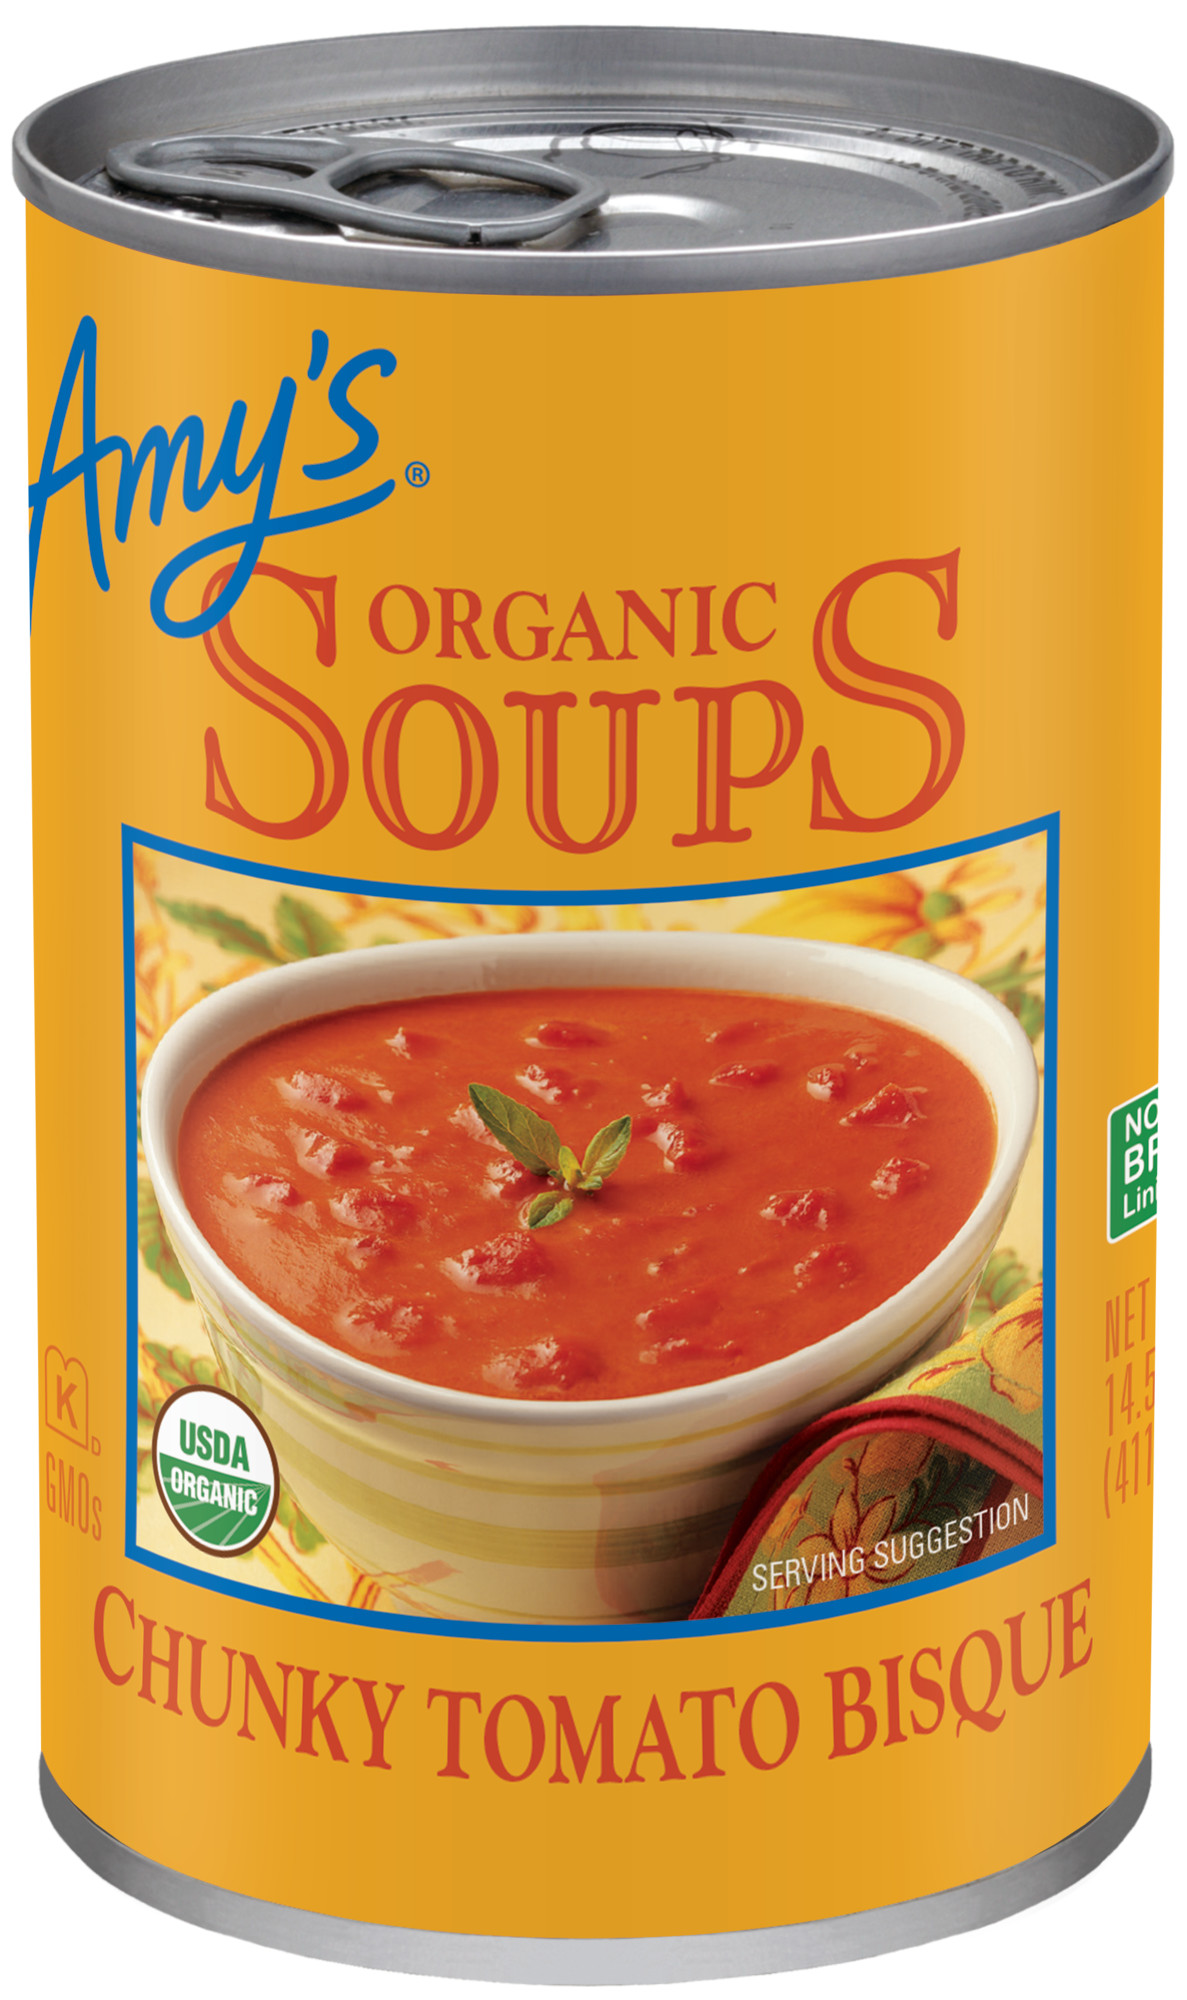 Amy’s Kitchen Soup, Organic Chunky Tomato Bisque Soup, Gluten Free, Canned Soup, 14.5 oz - image 1 of 8